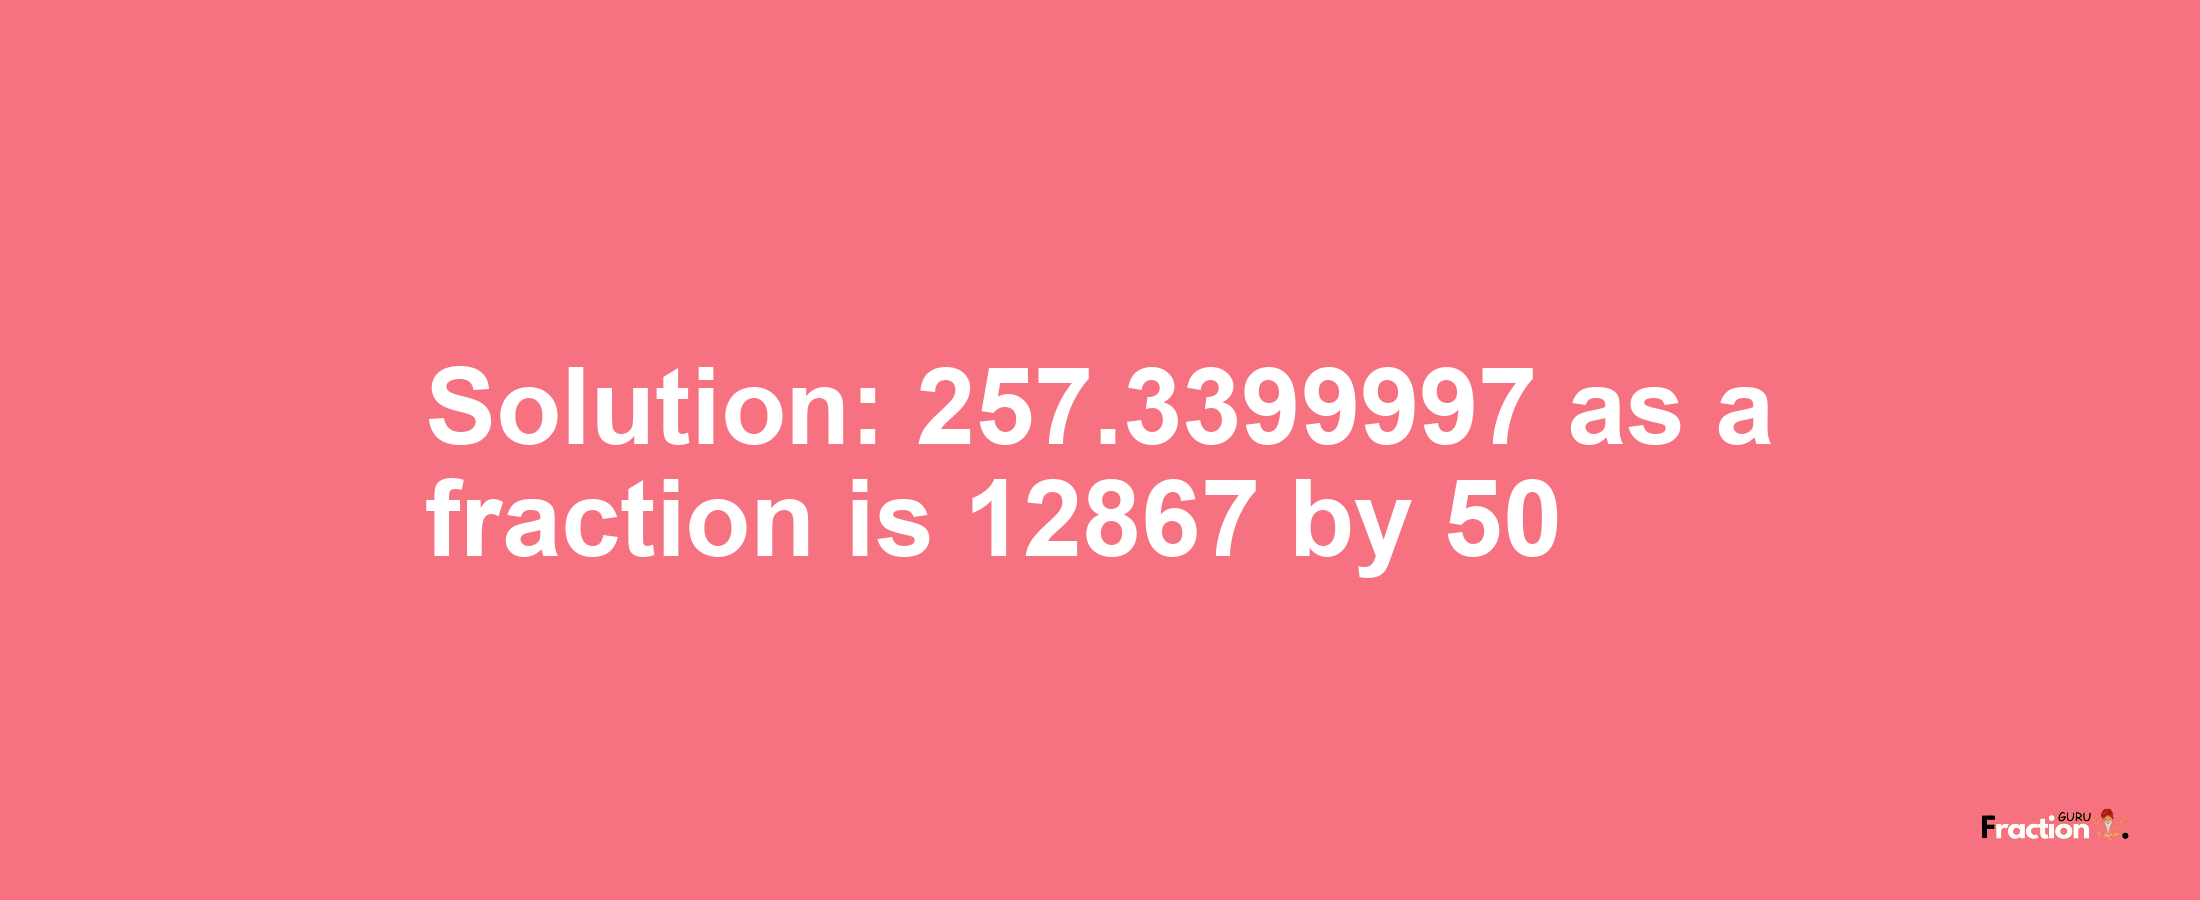 Solution:257.3399997 as a fraction is 12867/50